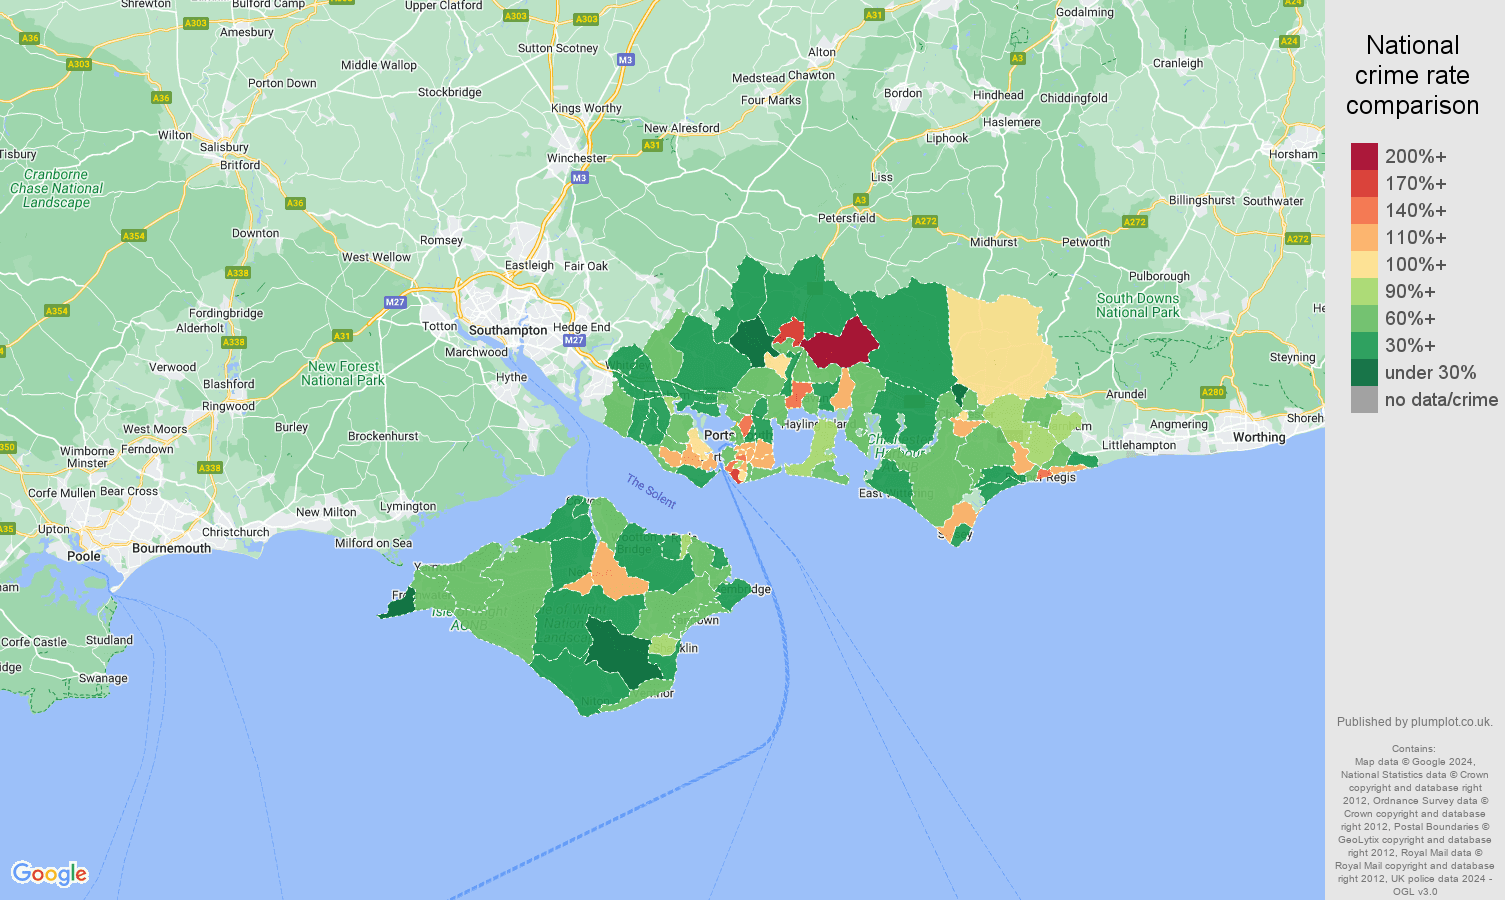 Portsmouth other theft crime rate comparison map